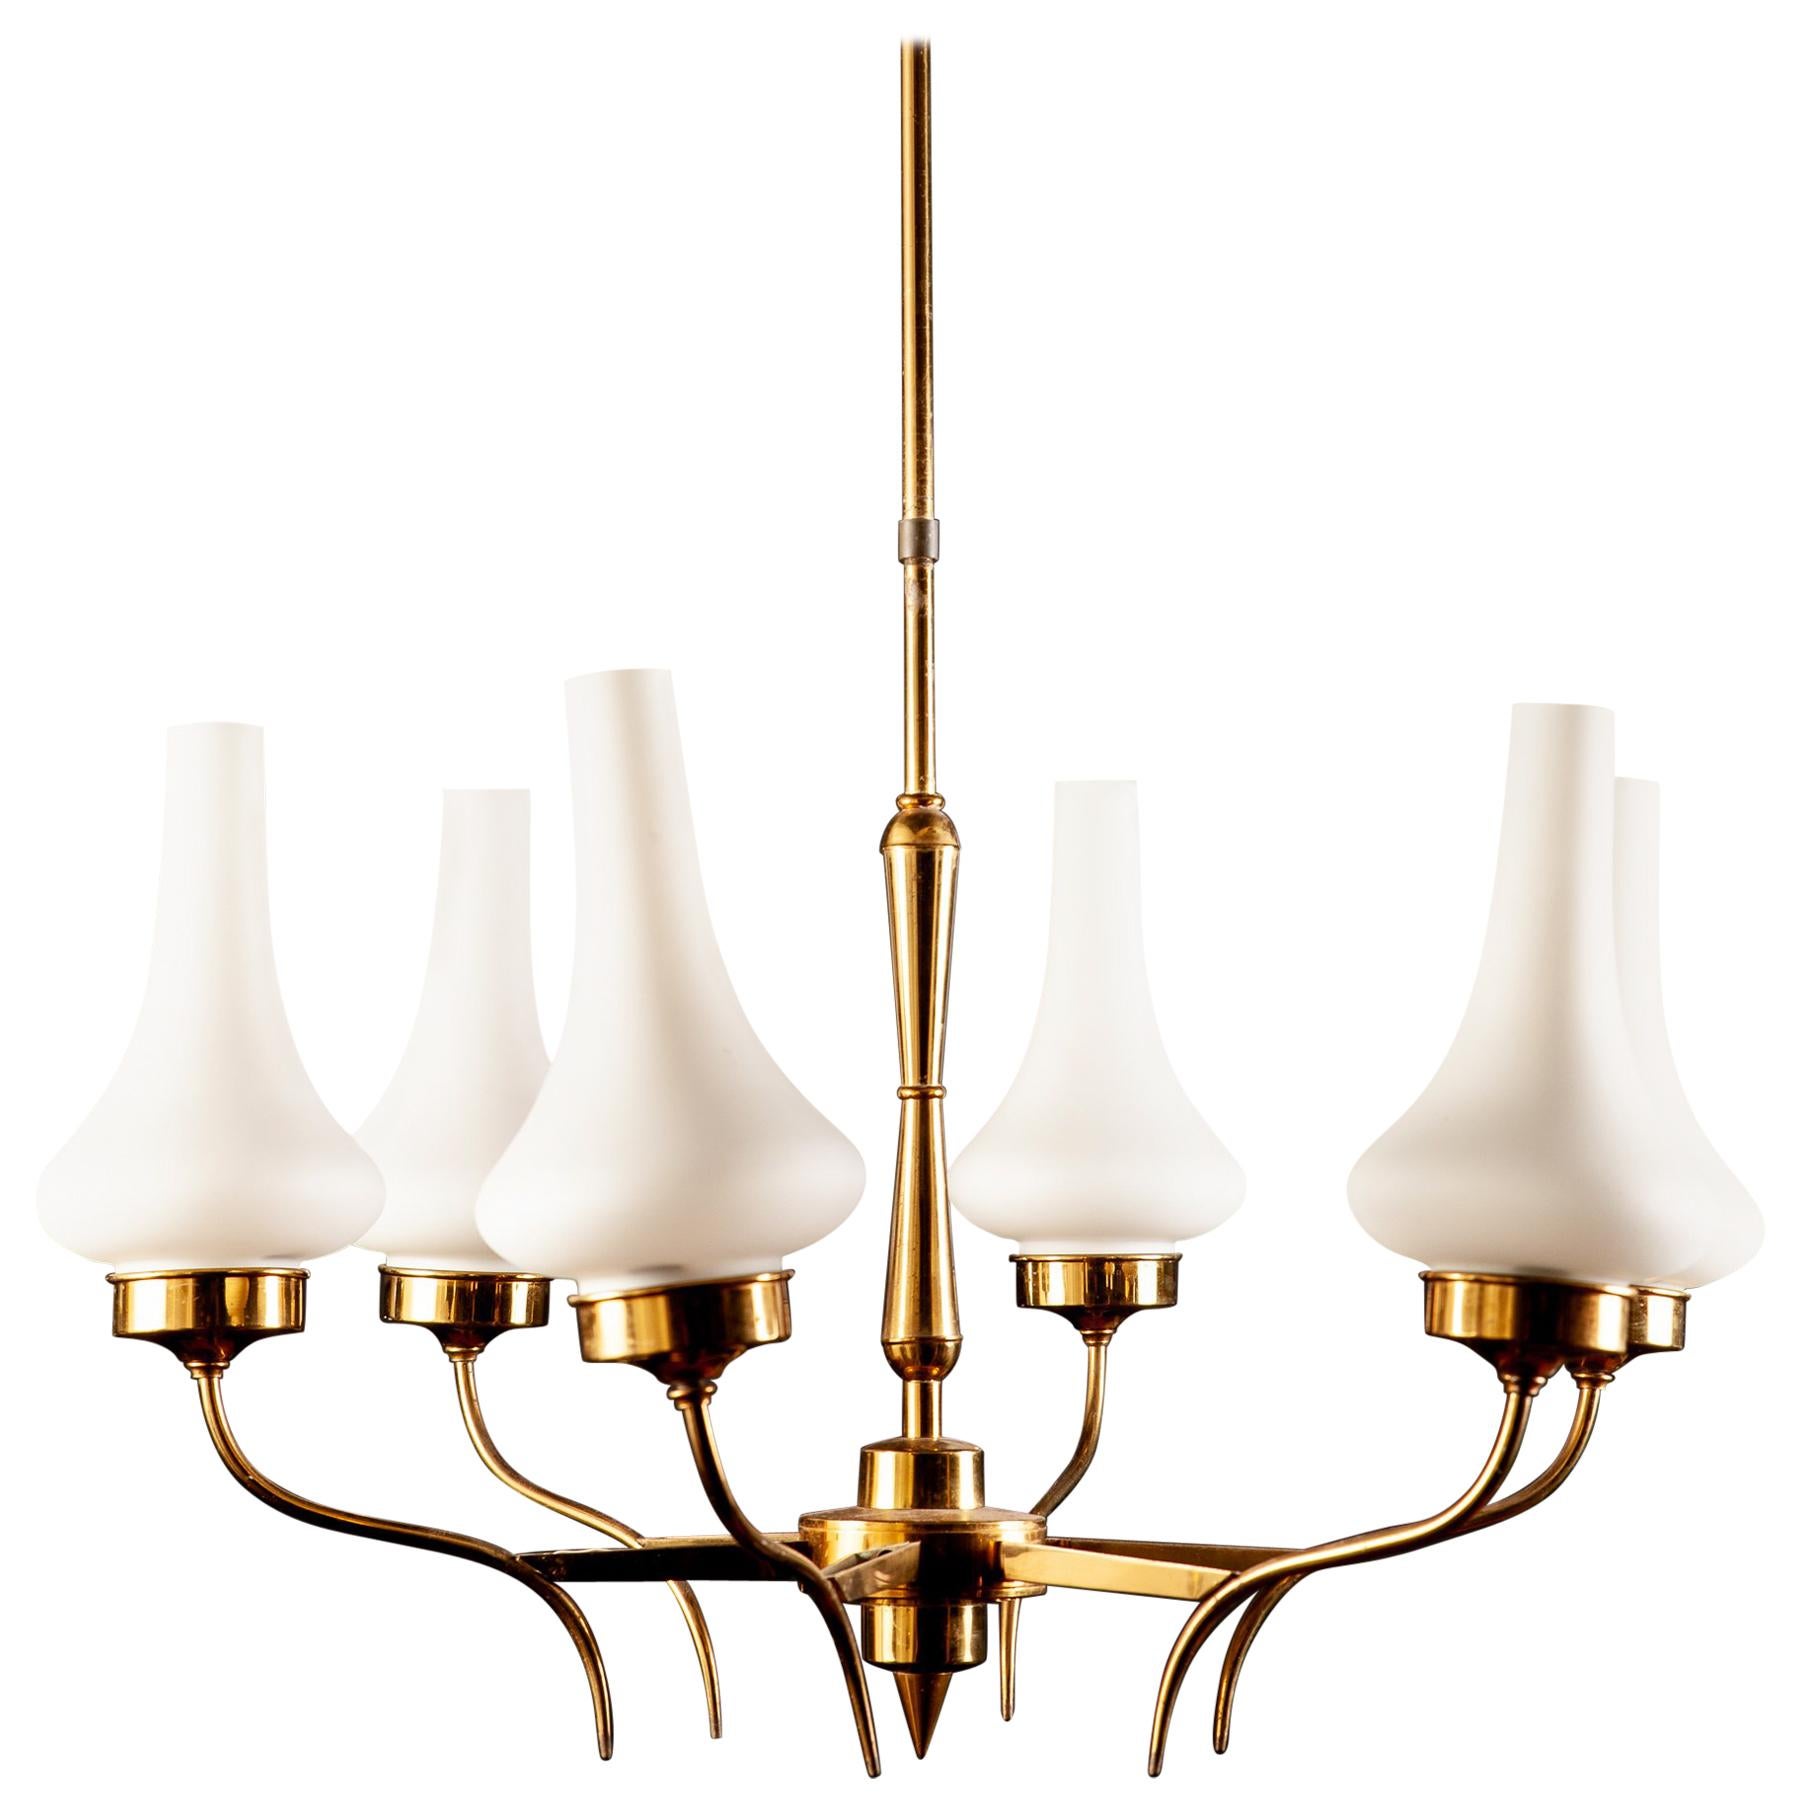 Arredoluce Attributed Midcentury Brass and Murano Glass Chandelier, Italy, 1958 For Sale 3